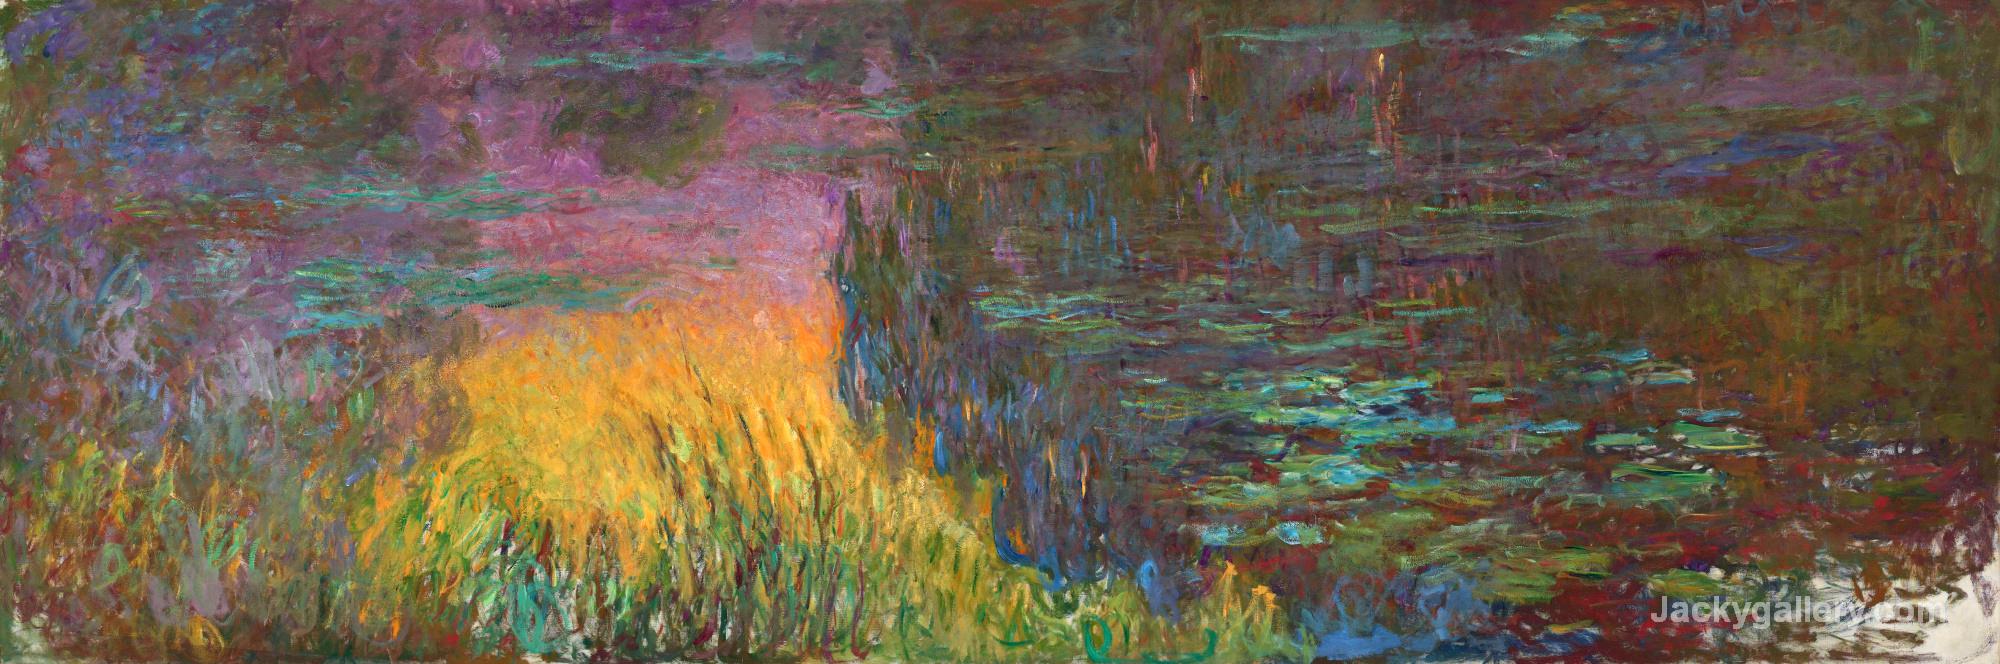 Water Lilies by Claude Monet paintings reproduction